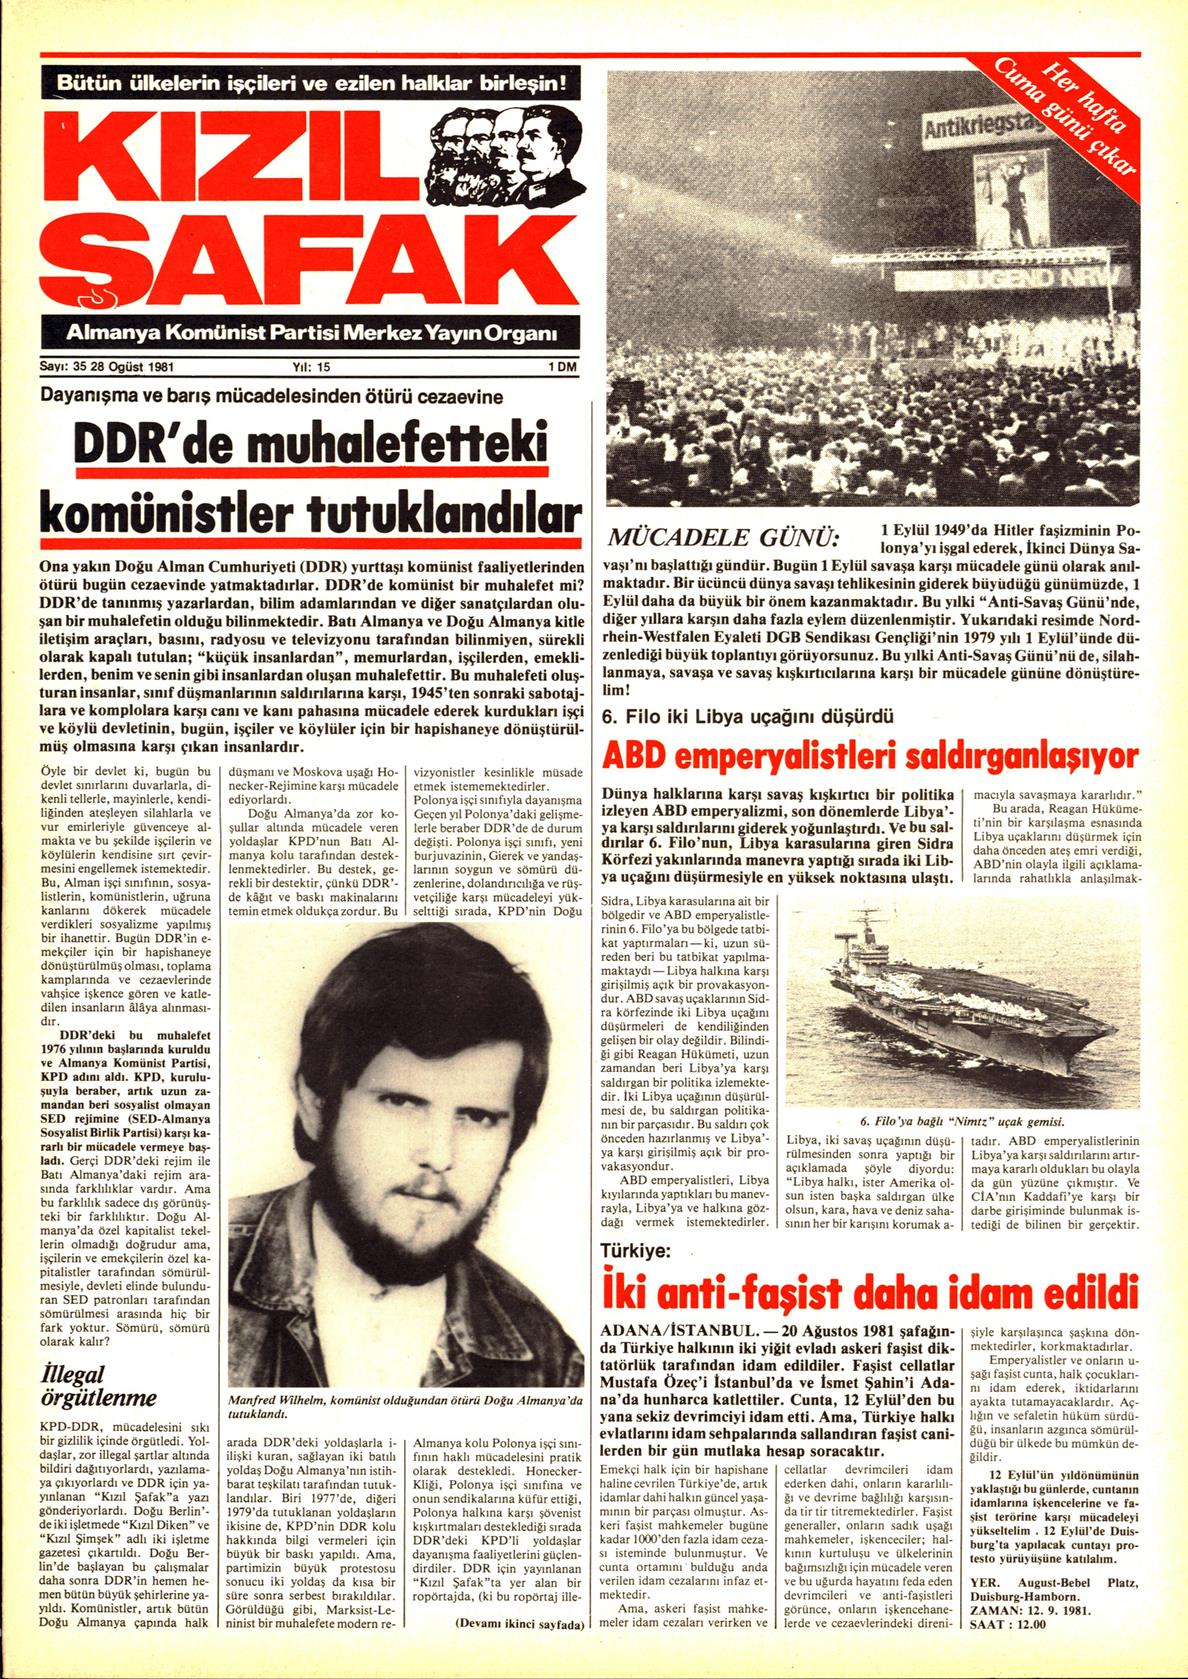 Roter Morgen, 15. Jg., 28. August 1981, Nr. 35, Seite 14